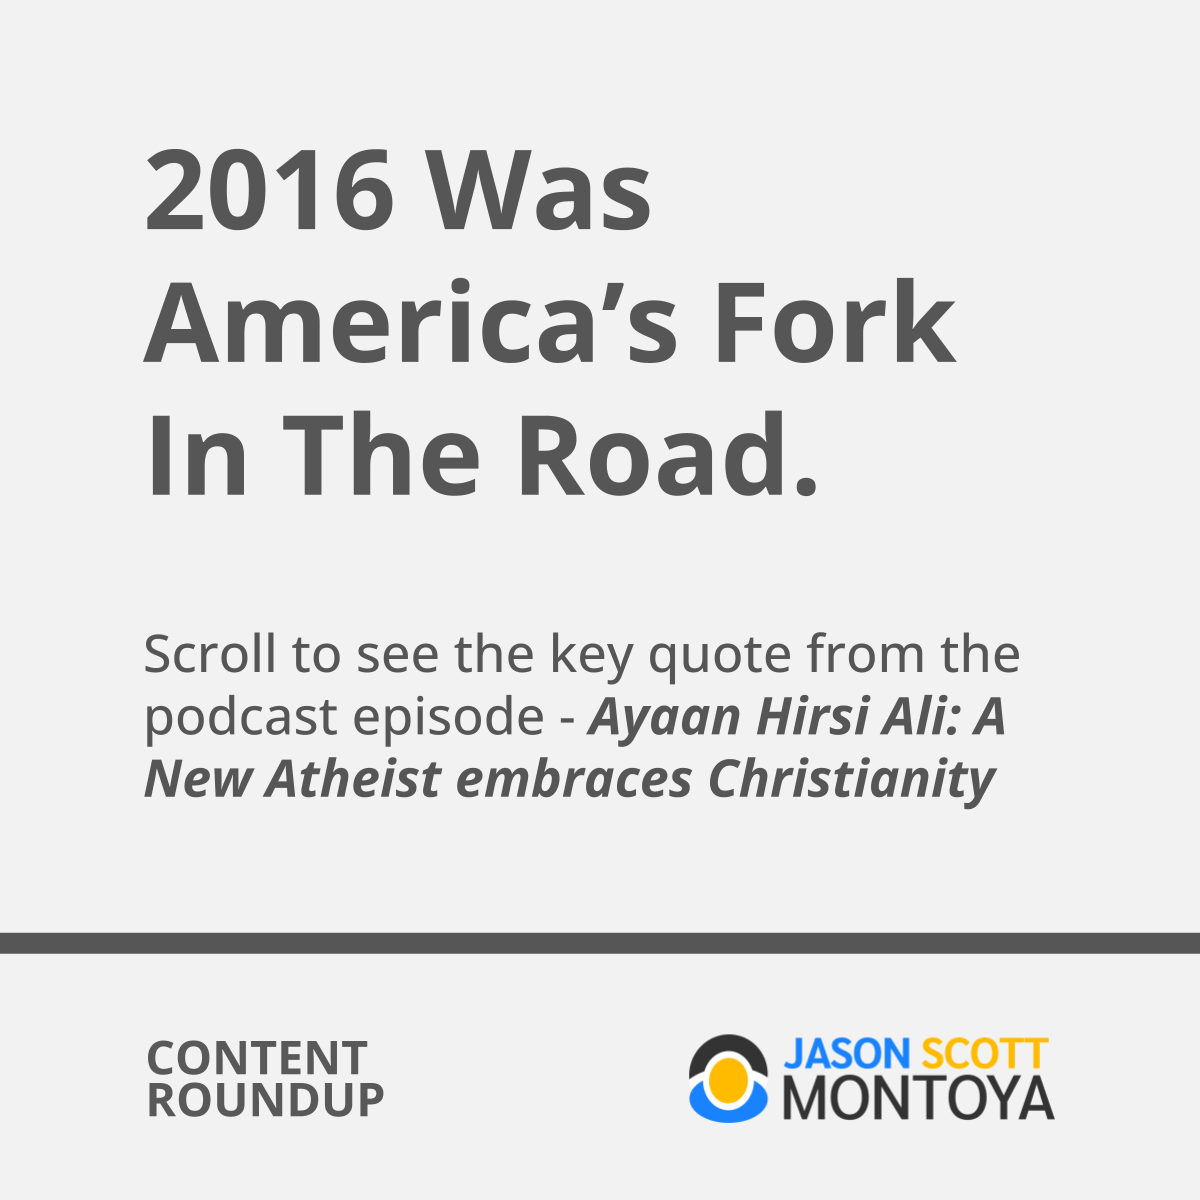 2016 Was America’s Fork In The Road.   Scroll to see the key quote from the podcast episode - Ayaan Hirsi Ali: A New Atheist embraces Christianity